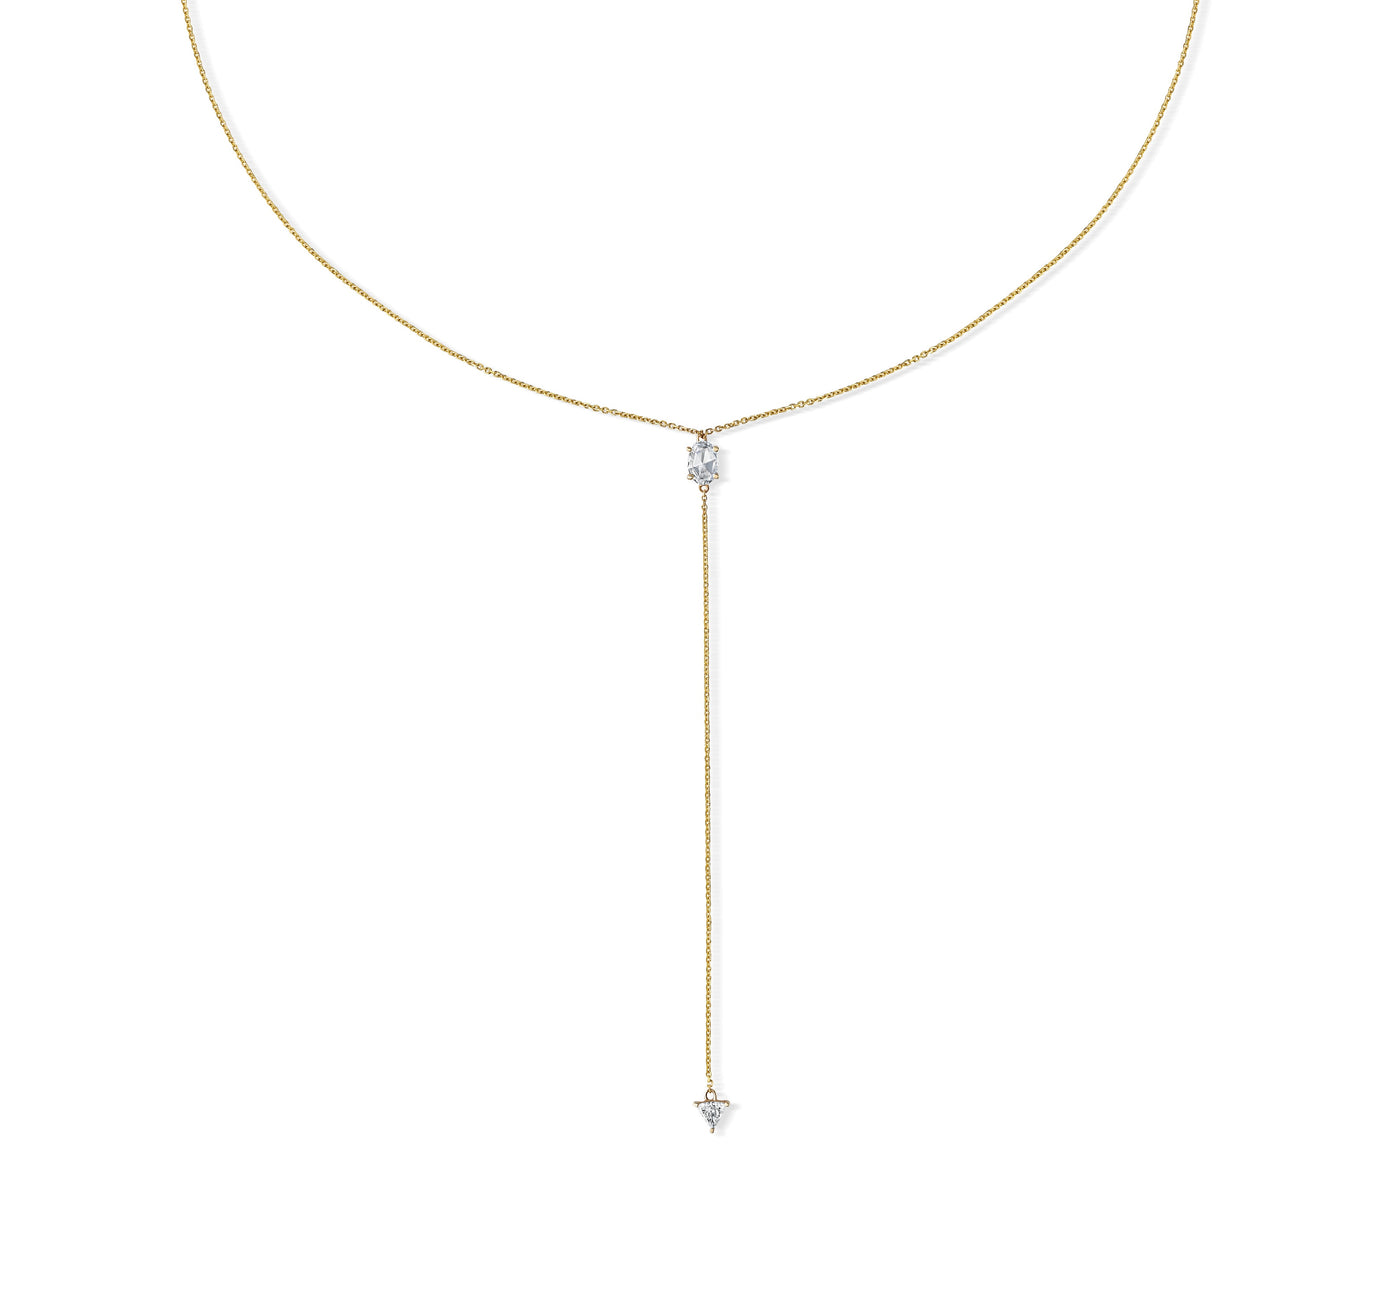 Mademoiselle Oval and Trillion Lariat Necklace